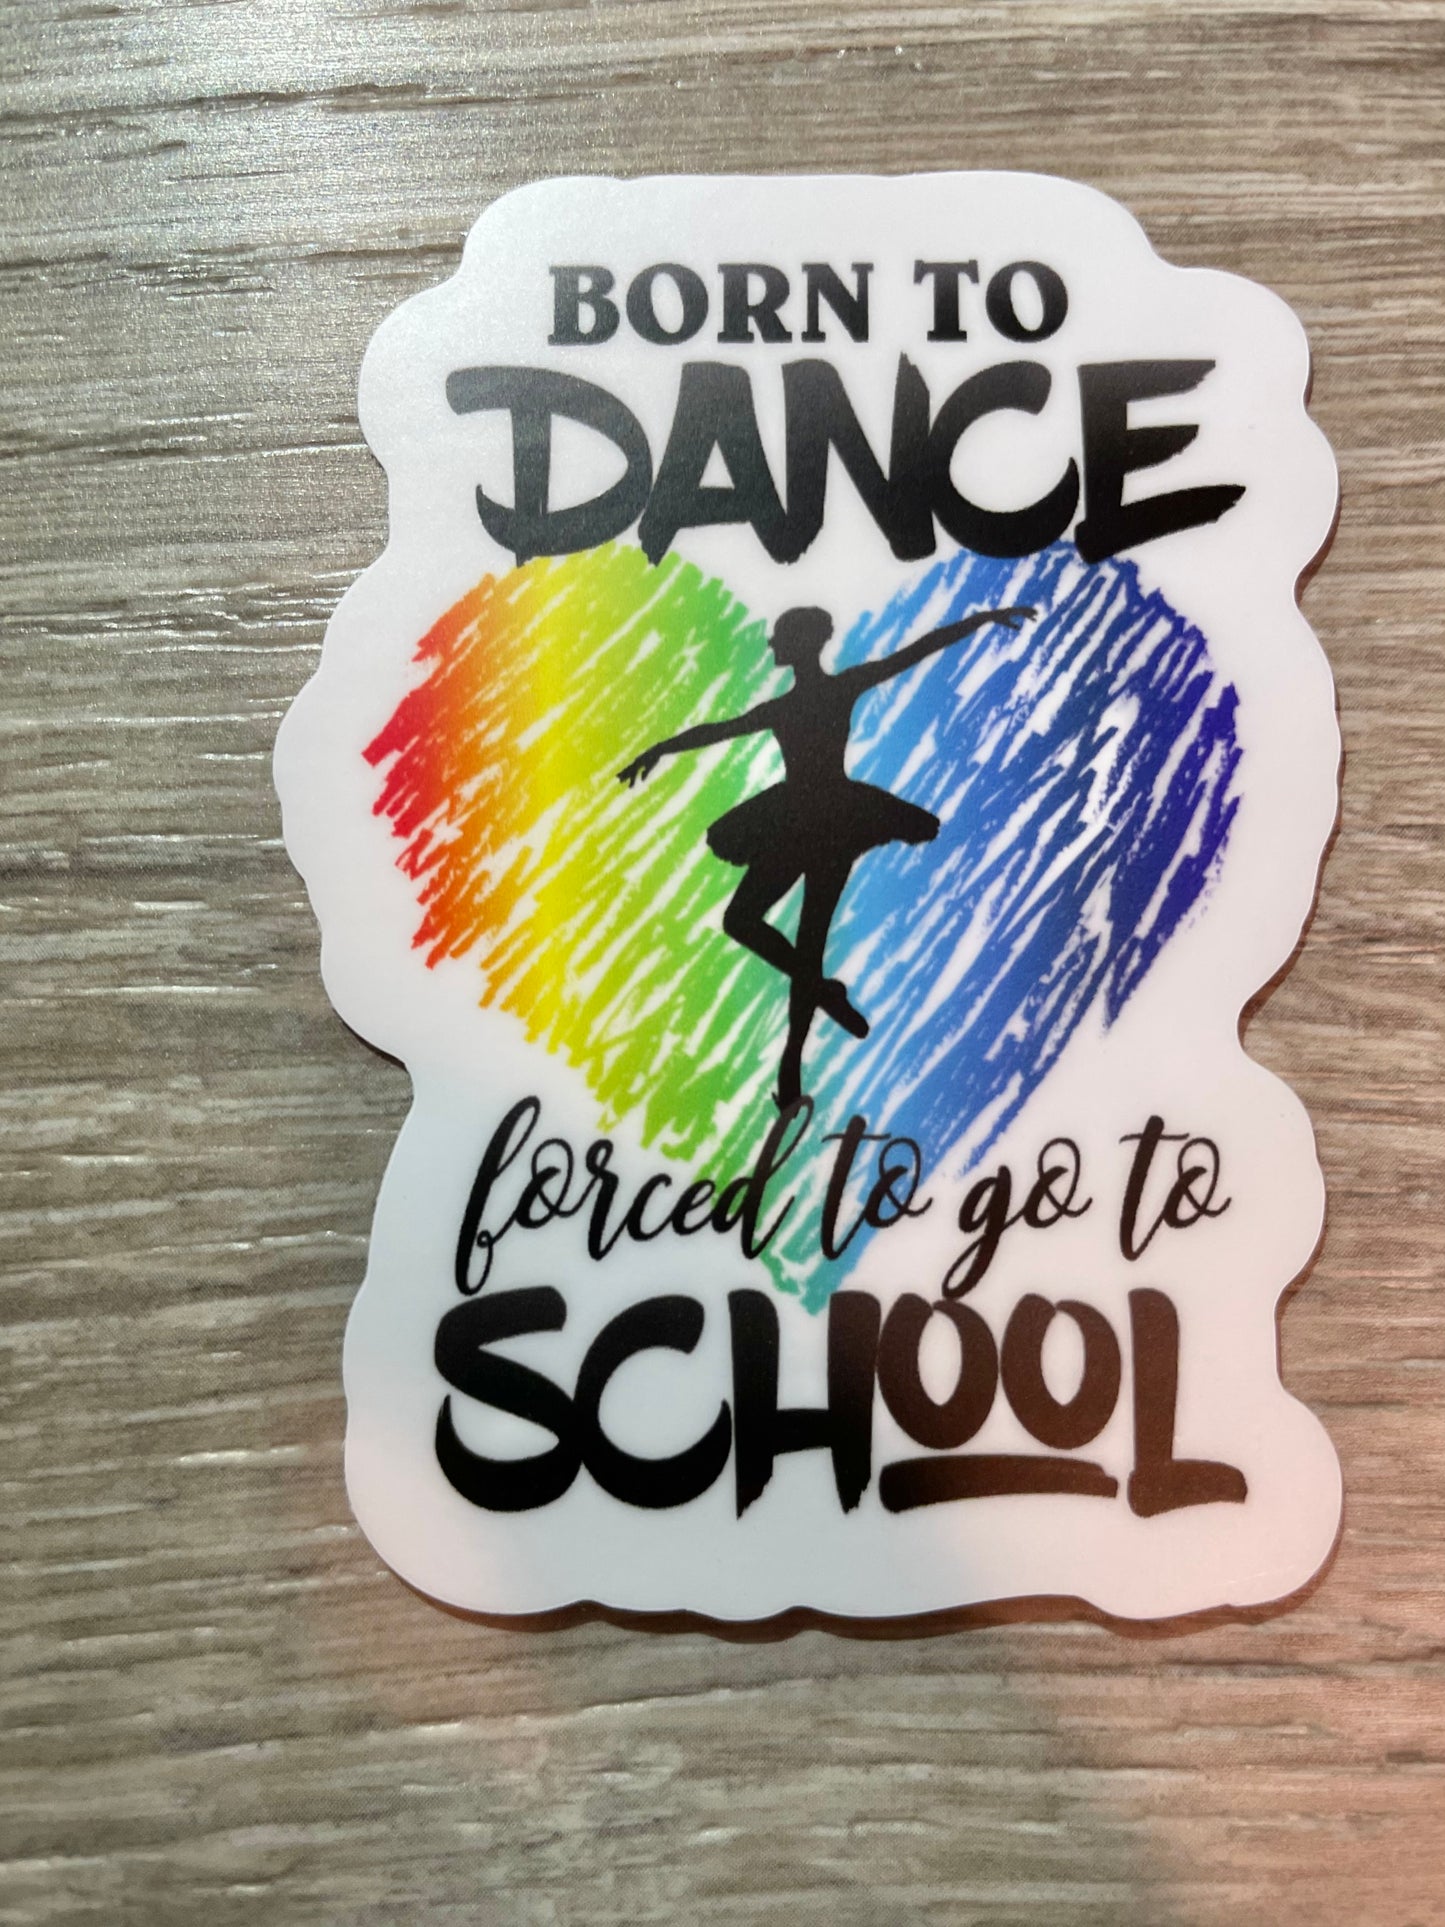 Born to Dance, Forced To Go To School Sticker, 2.2" x 3"